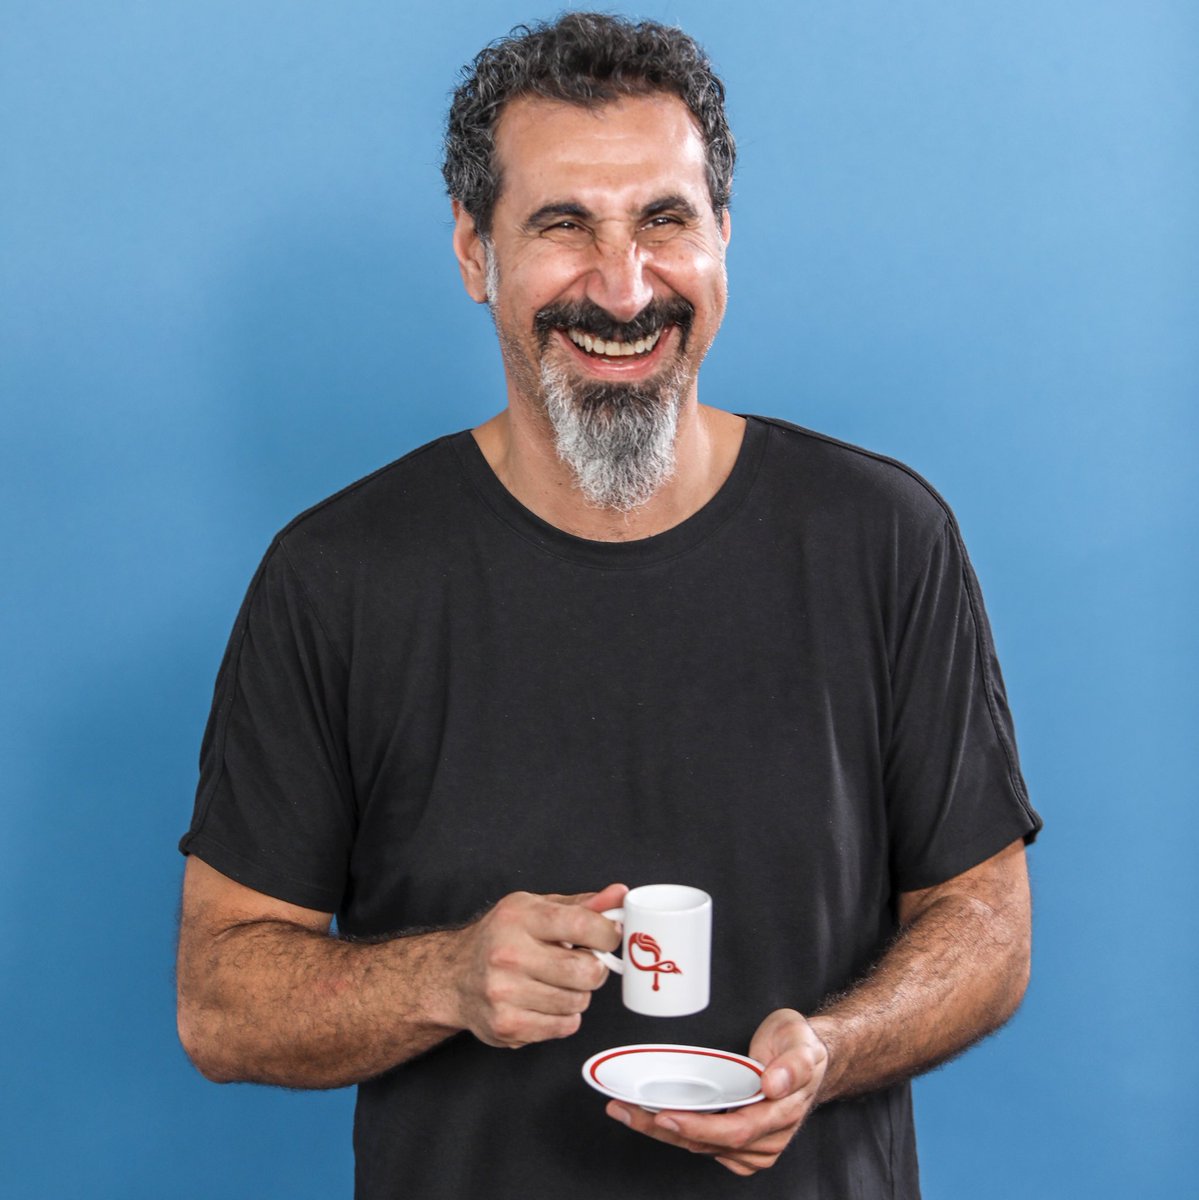 Serj Tankian on Twitter: "This goofy smile is what happens when ...